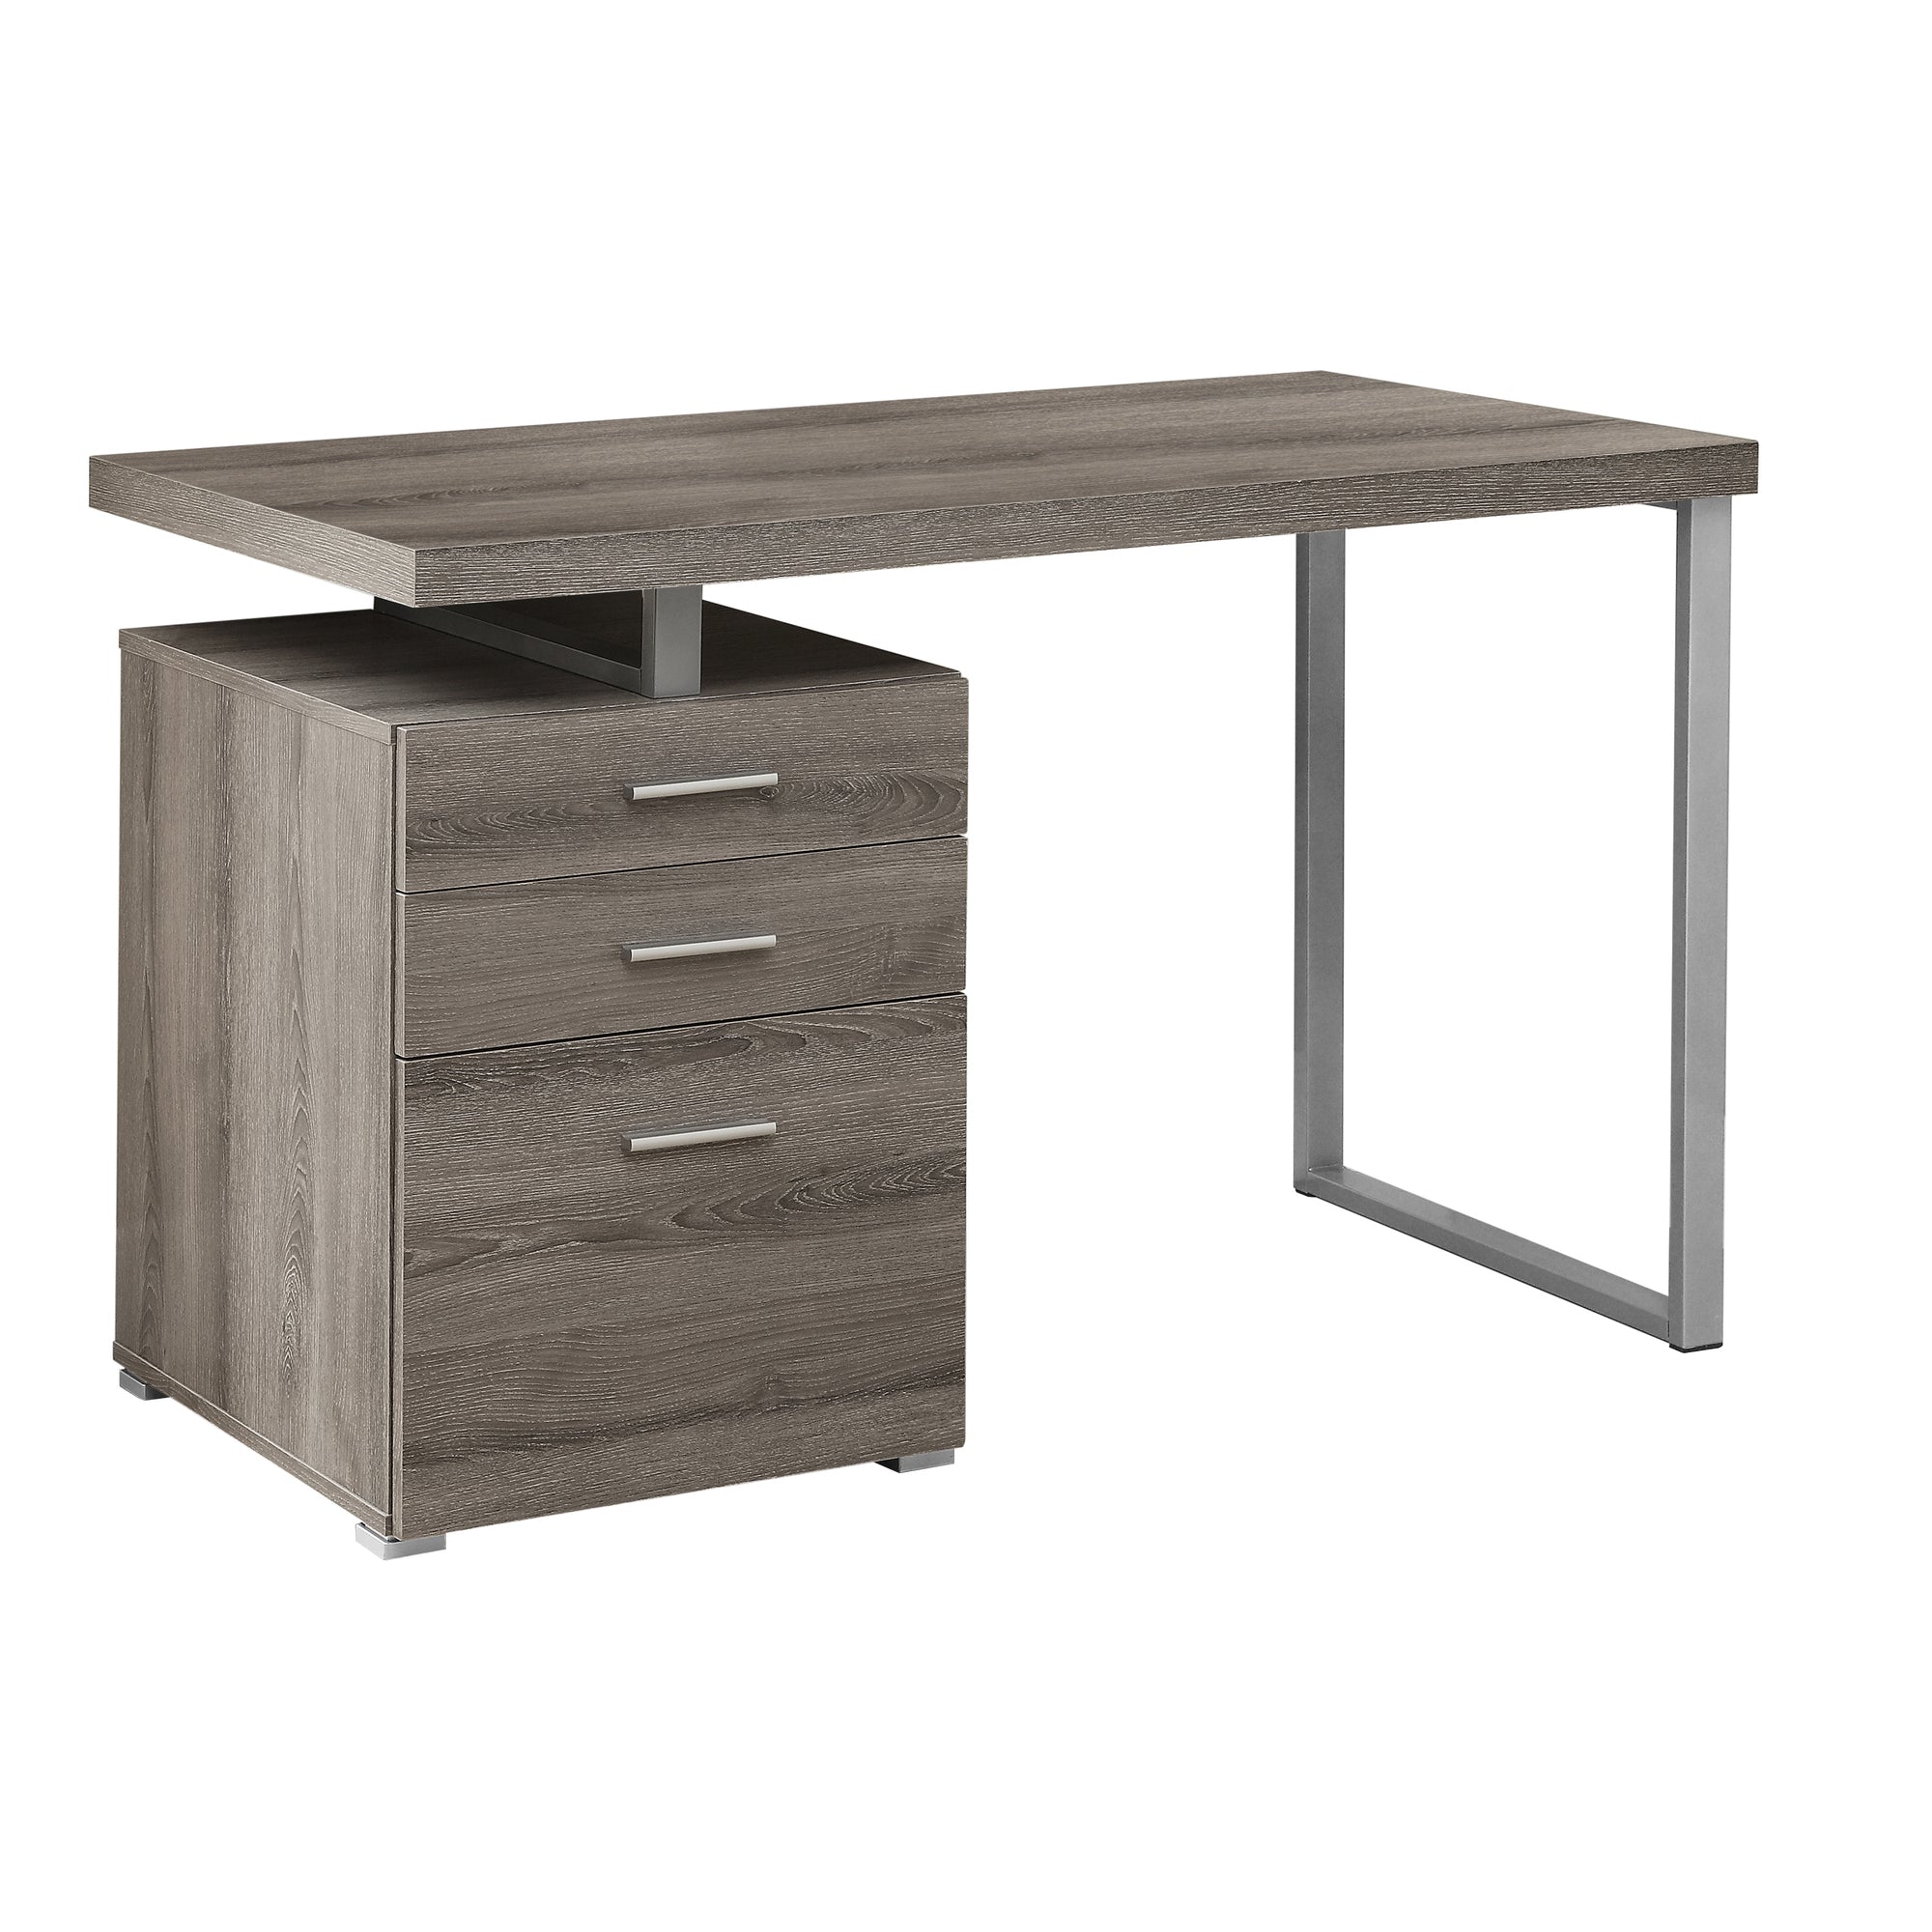 MN-257326    Computer Desk, Home Office, Laptop, Left, Right Set-Up, Storage Drawers, 48"L, Metal, Laminate, Dark Taupe, Contemporary, Modern